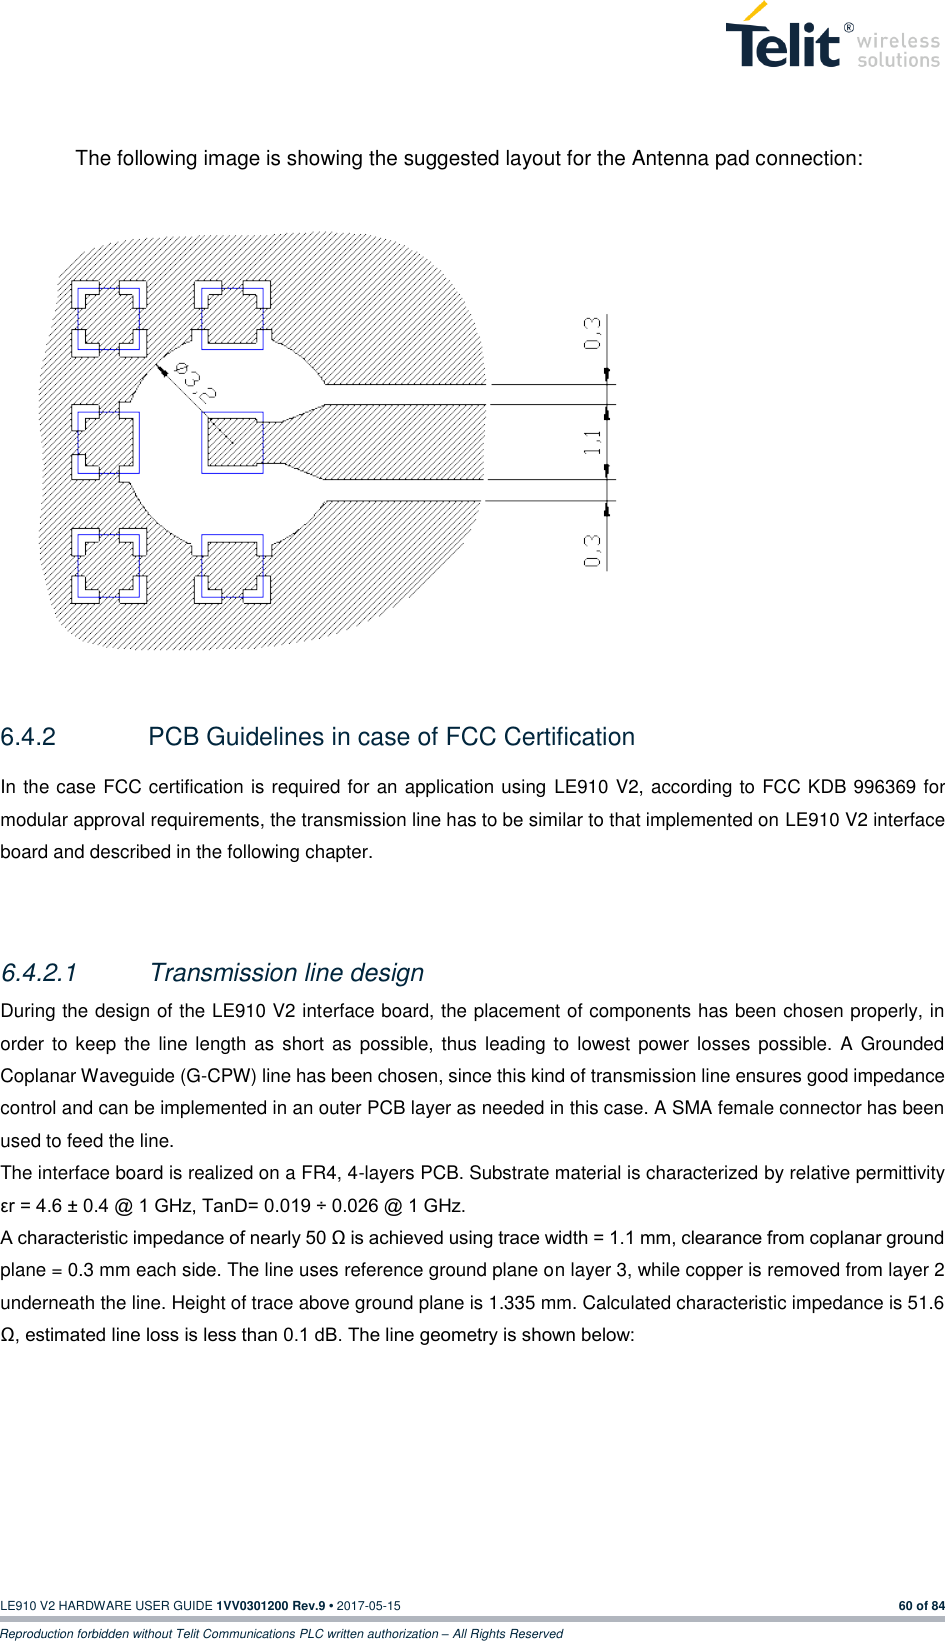   LE910 V2 HARDWARE USER GUIDE 1VV0301200 Rev.9 • 2017-05-15 60 of 84 Reproduction forbidden without Telit Communications PLC written authorization – All Rights Reserved  The following image is showing the suggested layout for the Antenna pad connection:               6.4.2  PCB Guidelines in case of FCC Certification In the case FCC certification is required for an application using LE910 V2, according to FCC KDB 996369 for modular approval requirements, the transmission line has to be similar to that implemented on LE910 V2 interface board and described in the following chapter.  6.4.2.1  Transmission line design During the design of the LE910 V2 interface board, the placement of components has been chosen properly, in order  to keep  the  line length as  short  as possible, thus leading to  lowest power losses possible. A Grounded Coplanar Waveguide (G-CPW) line has been chosen, since this kind of transmission line ensures good impedance control and can be implemented in an outer PCB layer as needed in this case. A SMA female connector has been used to feed the line. The interface board is realized on a FR4, 4-layers PCB. Substrate material is characterized by relative permittivity εr = 4.6 ± 0.4 @ 1 GHz, TanD= 0.019 ÷ 0.026 @ 1 GHz. A characteristic impedance of nearly 50 Ω is achieved using trace width = 1.1 mm, clearance from coplanar ground plane = 0.3 mm each side. The line uses reference ground plane on layer 3, while copper is removed from layer 2 underneath the line. Height of trace above ground plane is 1.335 mm. Calculated characteristic impedance is 51.6 Ω, estimated line loss is less than 0.1 dB. The line geometry is shown below: 